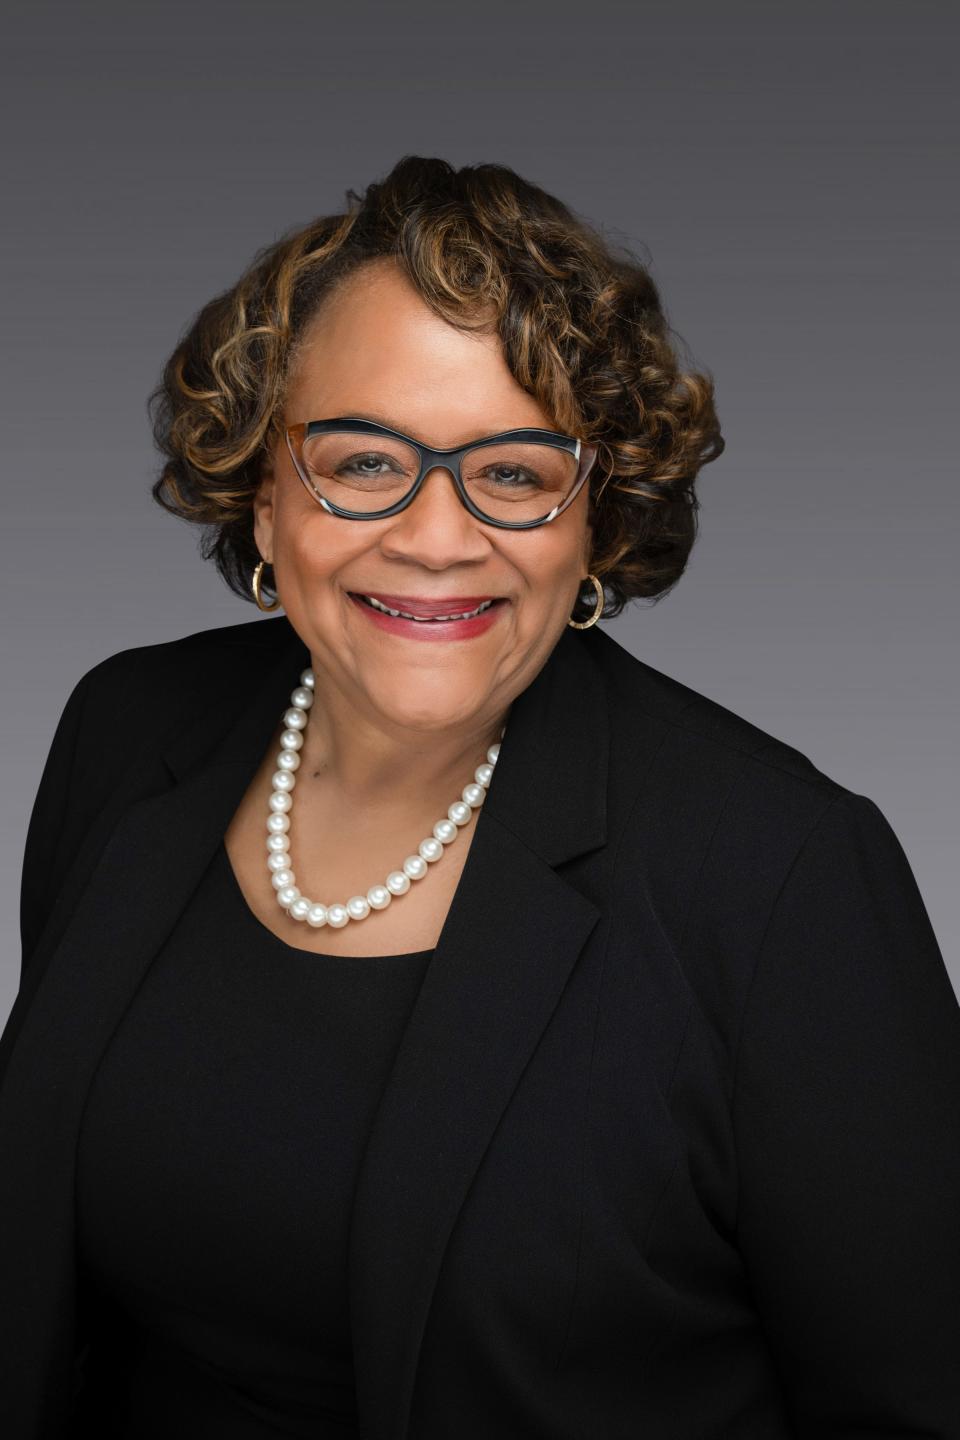 Maureen L. Stapleton is the executive director of CelebrateOne, the city of Columbus’ initiative to reduce infant mortality.